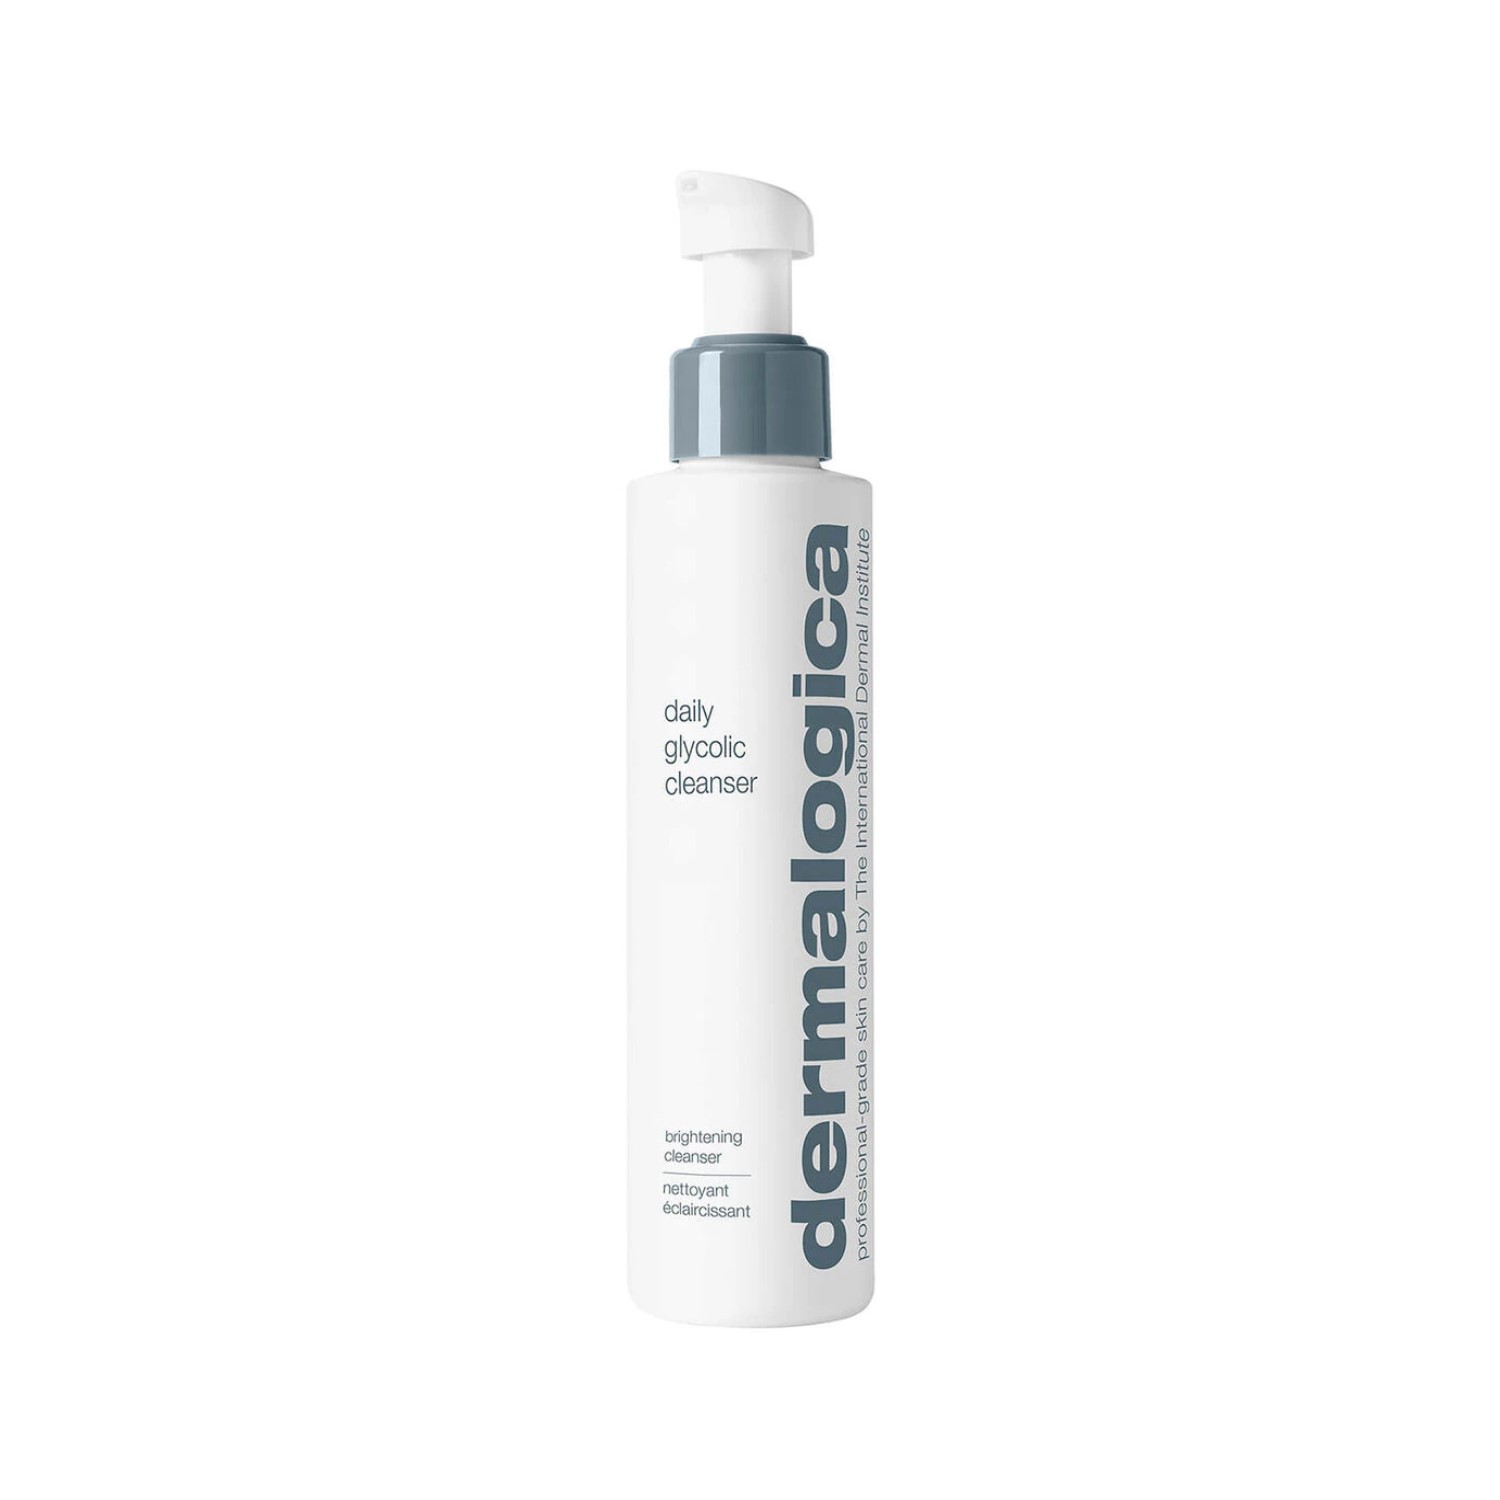 daily glycolic cleanser (gel limpiador)